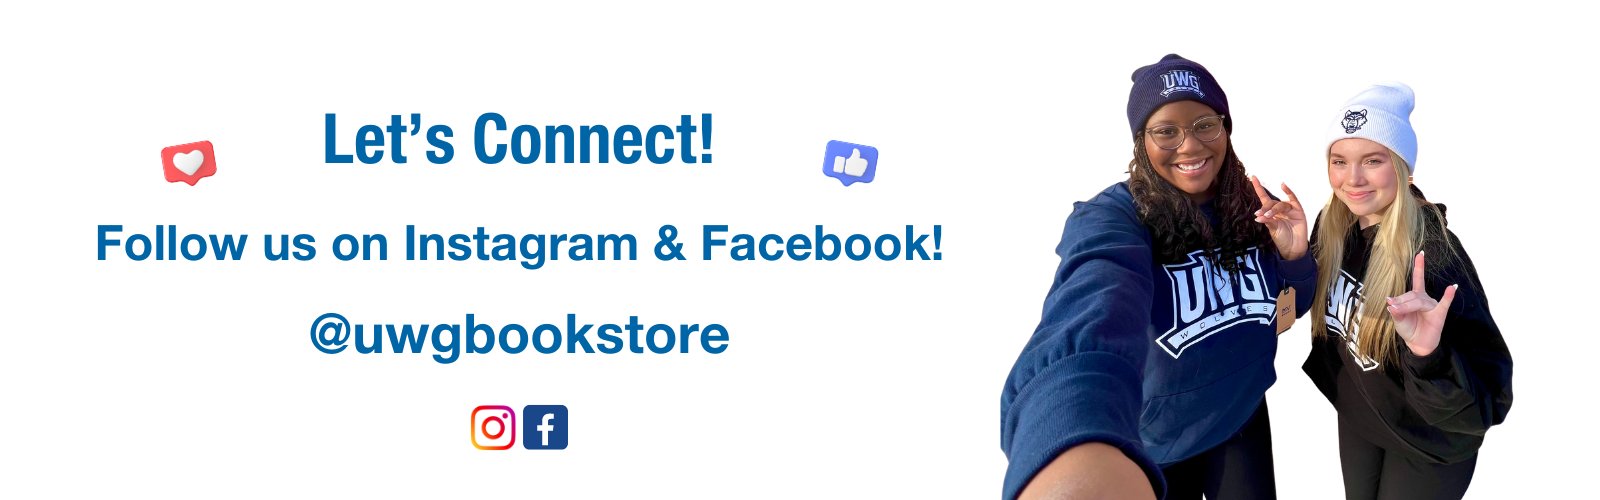 Let's connect! Follow us on Instagram & Facebook! @uwgbookstore